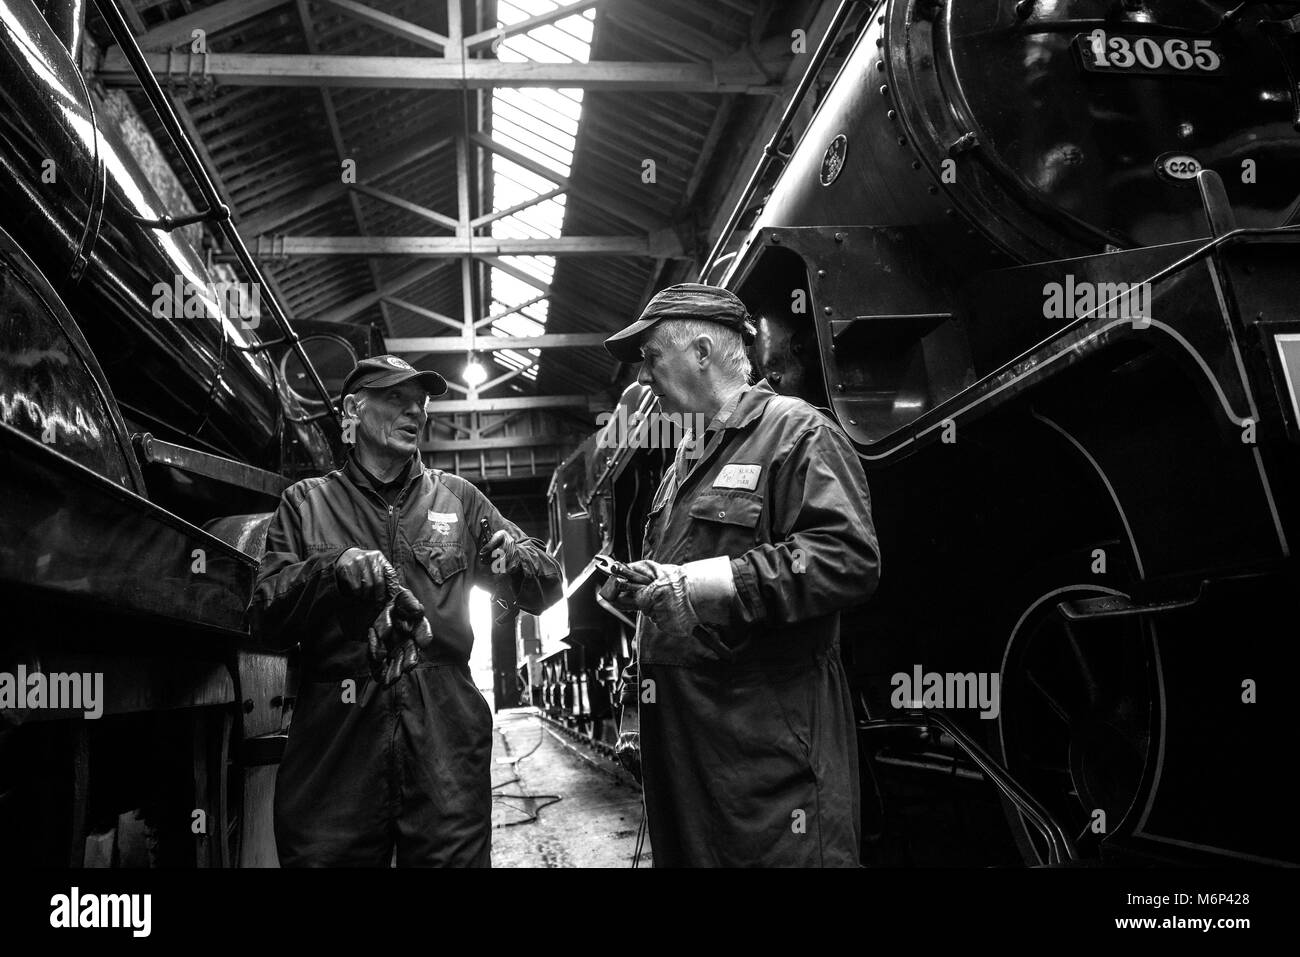 A Day at East Lancs Railway Stock Photo - Alamy